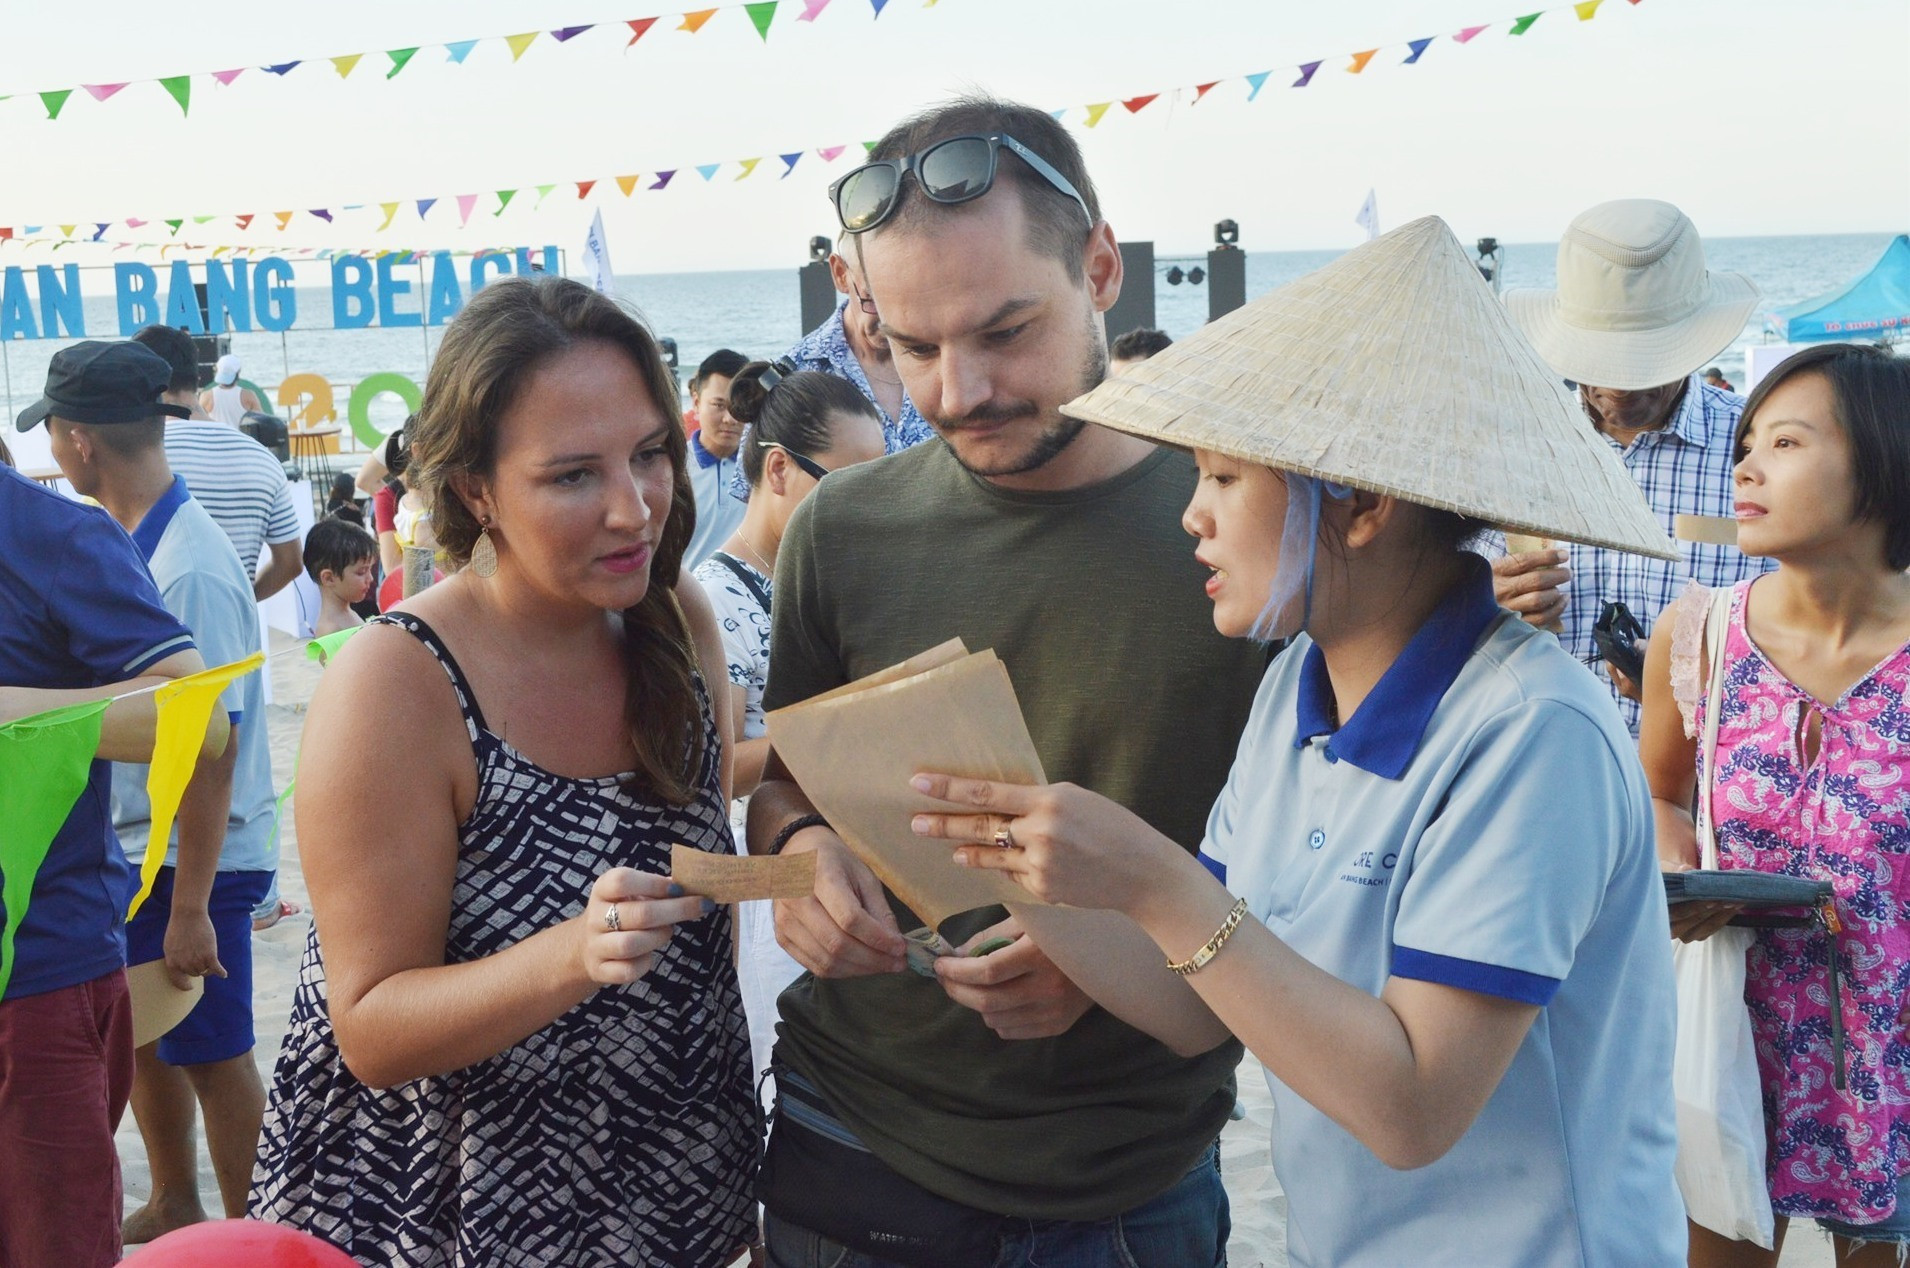 International tourists learn about specialities at the festival.